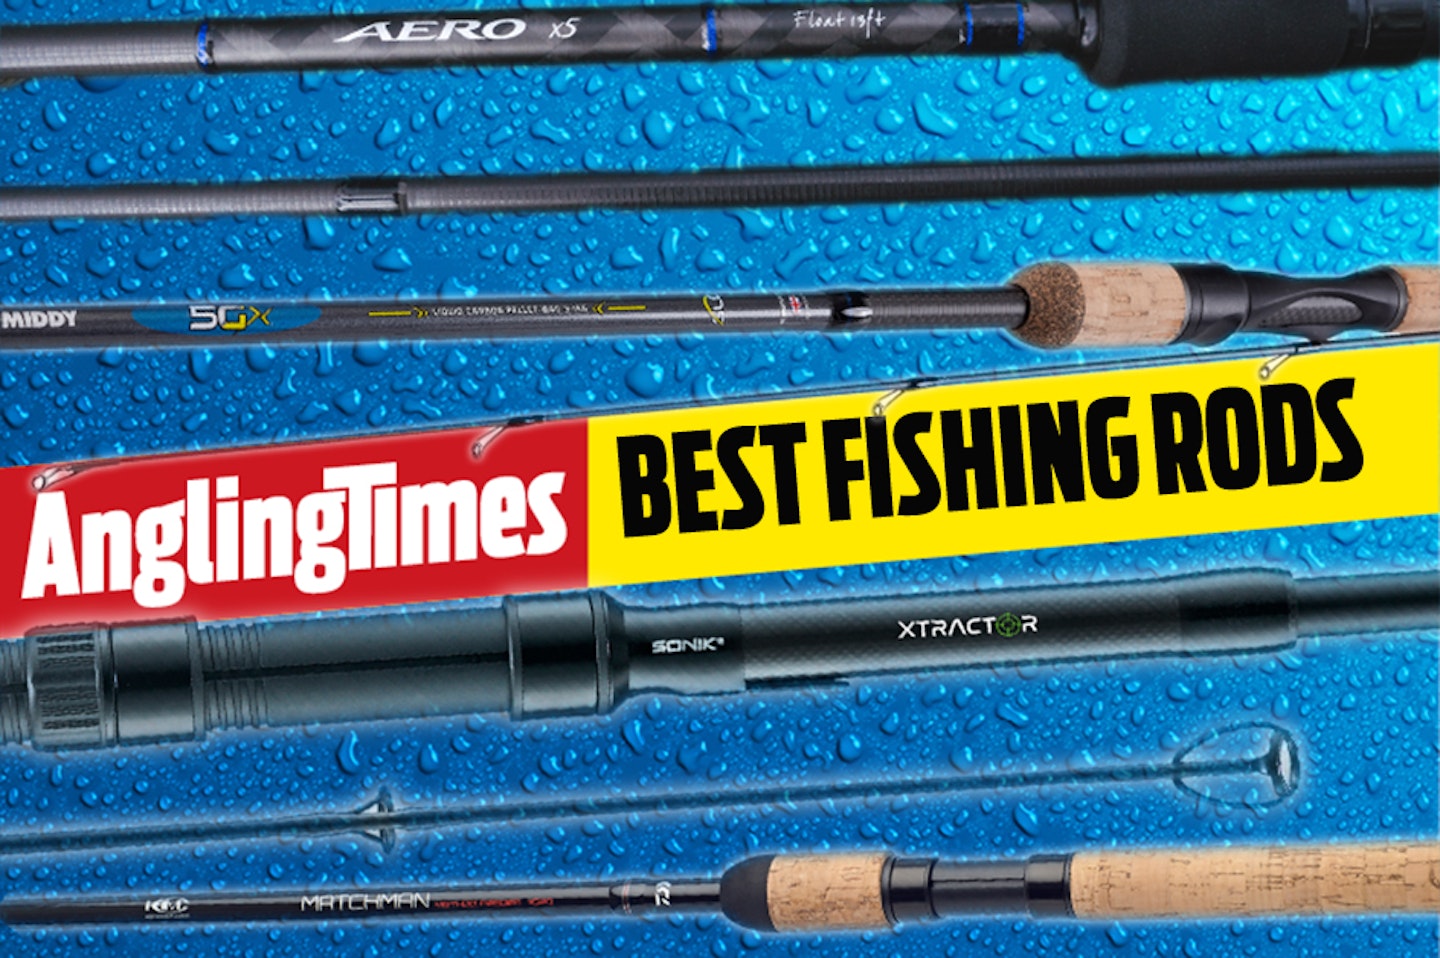 Best Mackerel Rods UK  Feathering & Spinning Rods Ranked